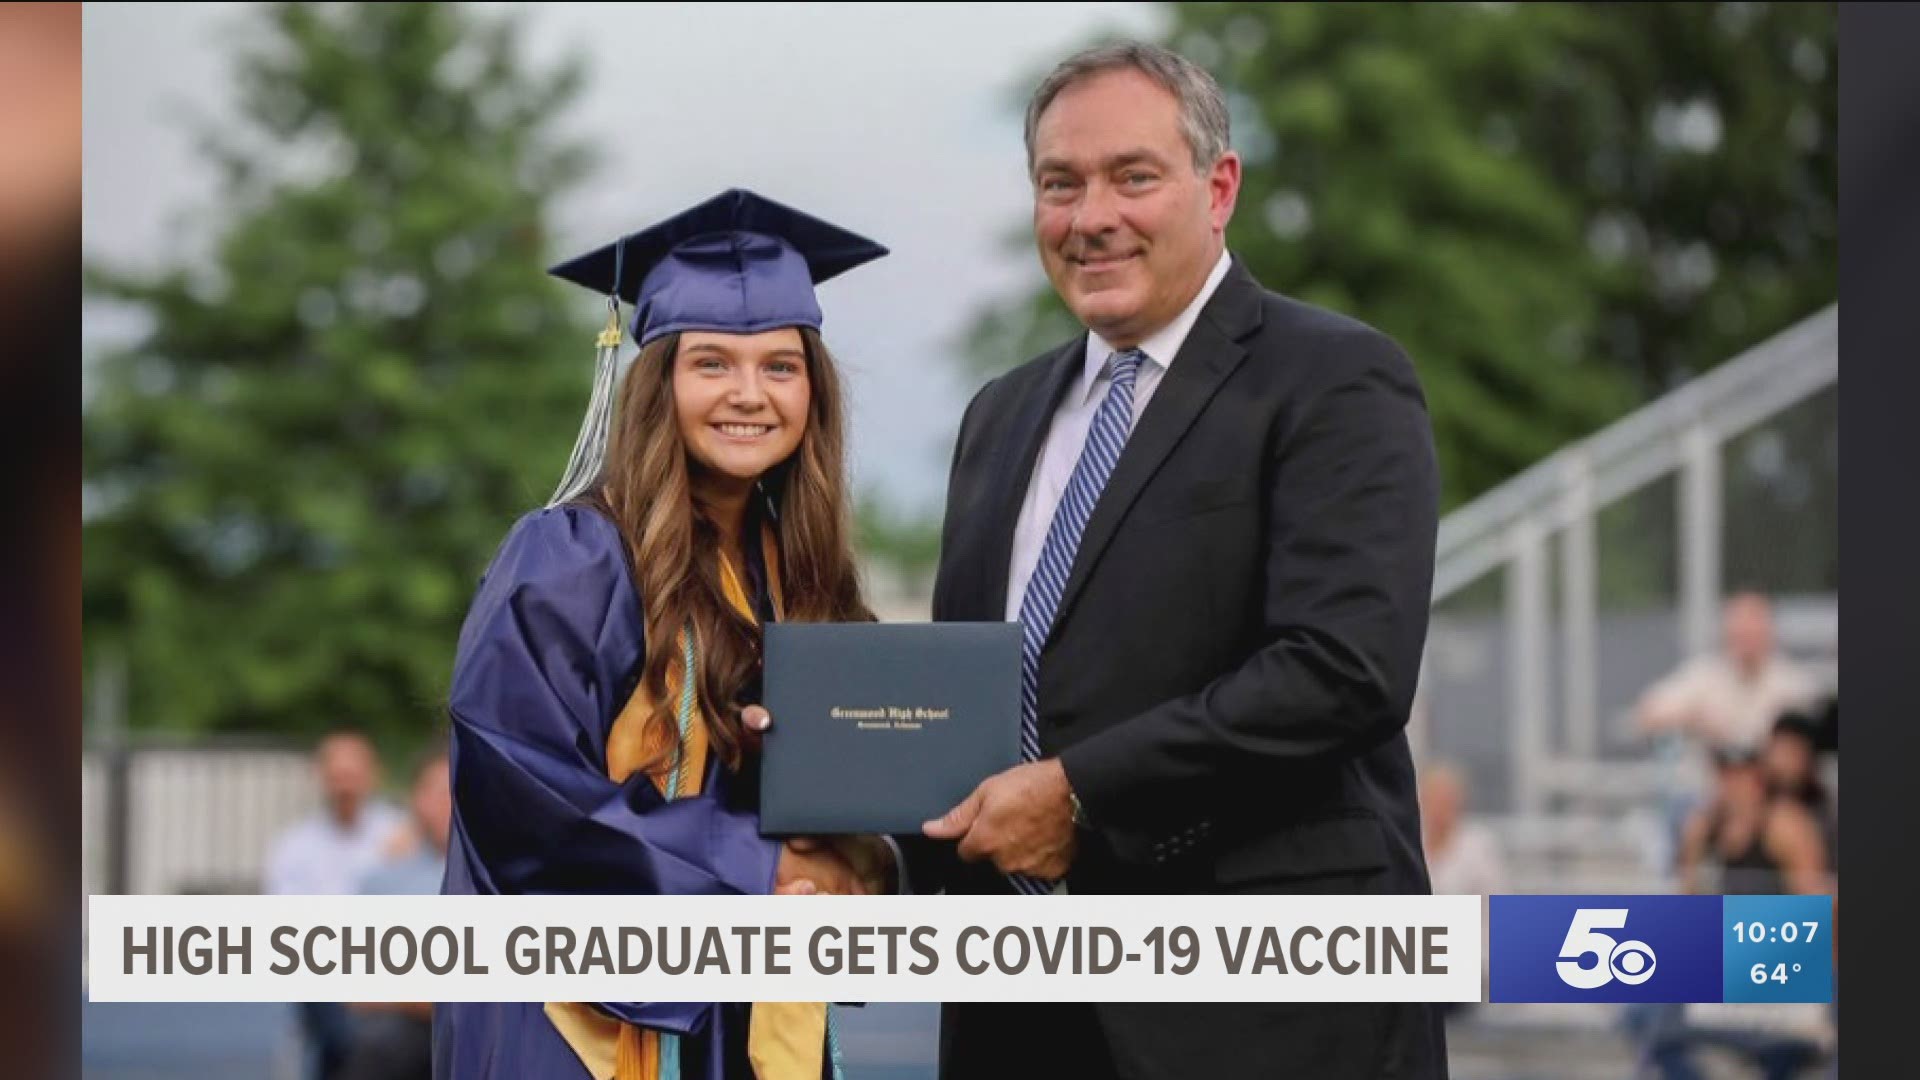 18-year-old Alexis Clifford chose to get vaccinated after her senior year was flipped upside down by COVID-19, yet the pandemic fuels her passion for nursing.